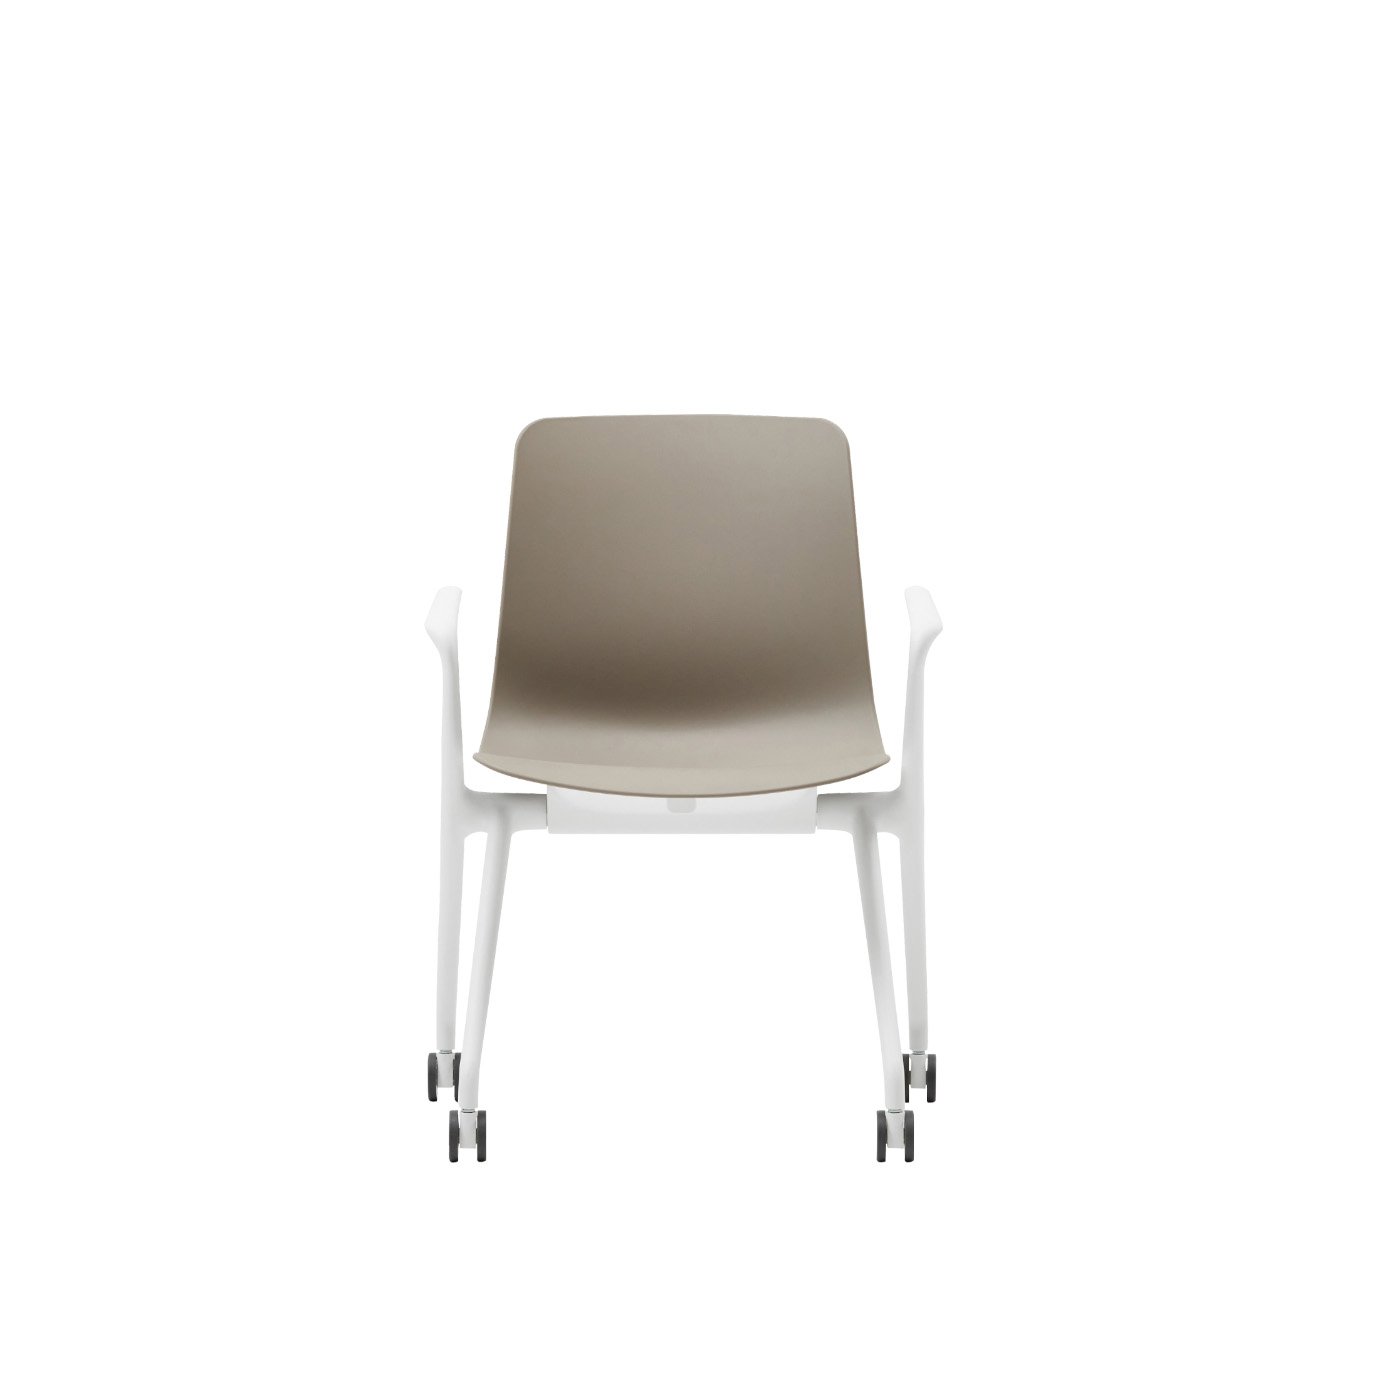 Haworth Bowi conference chair front angle